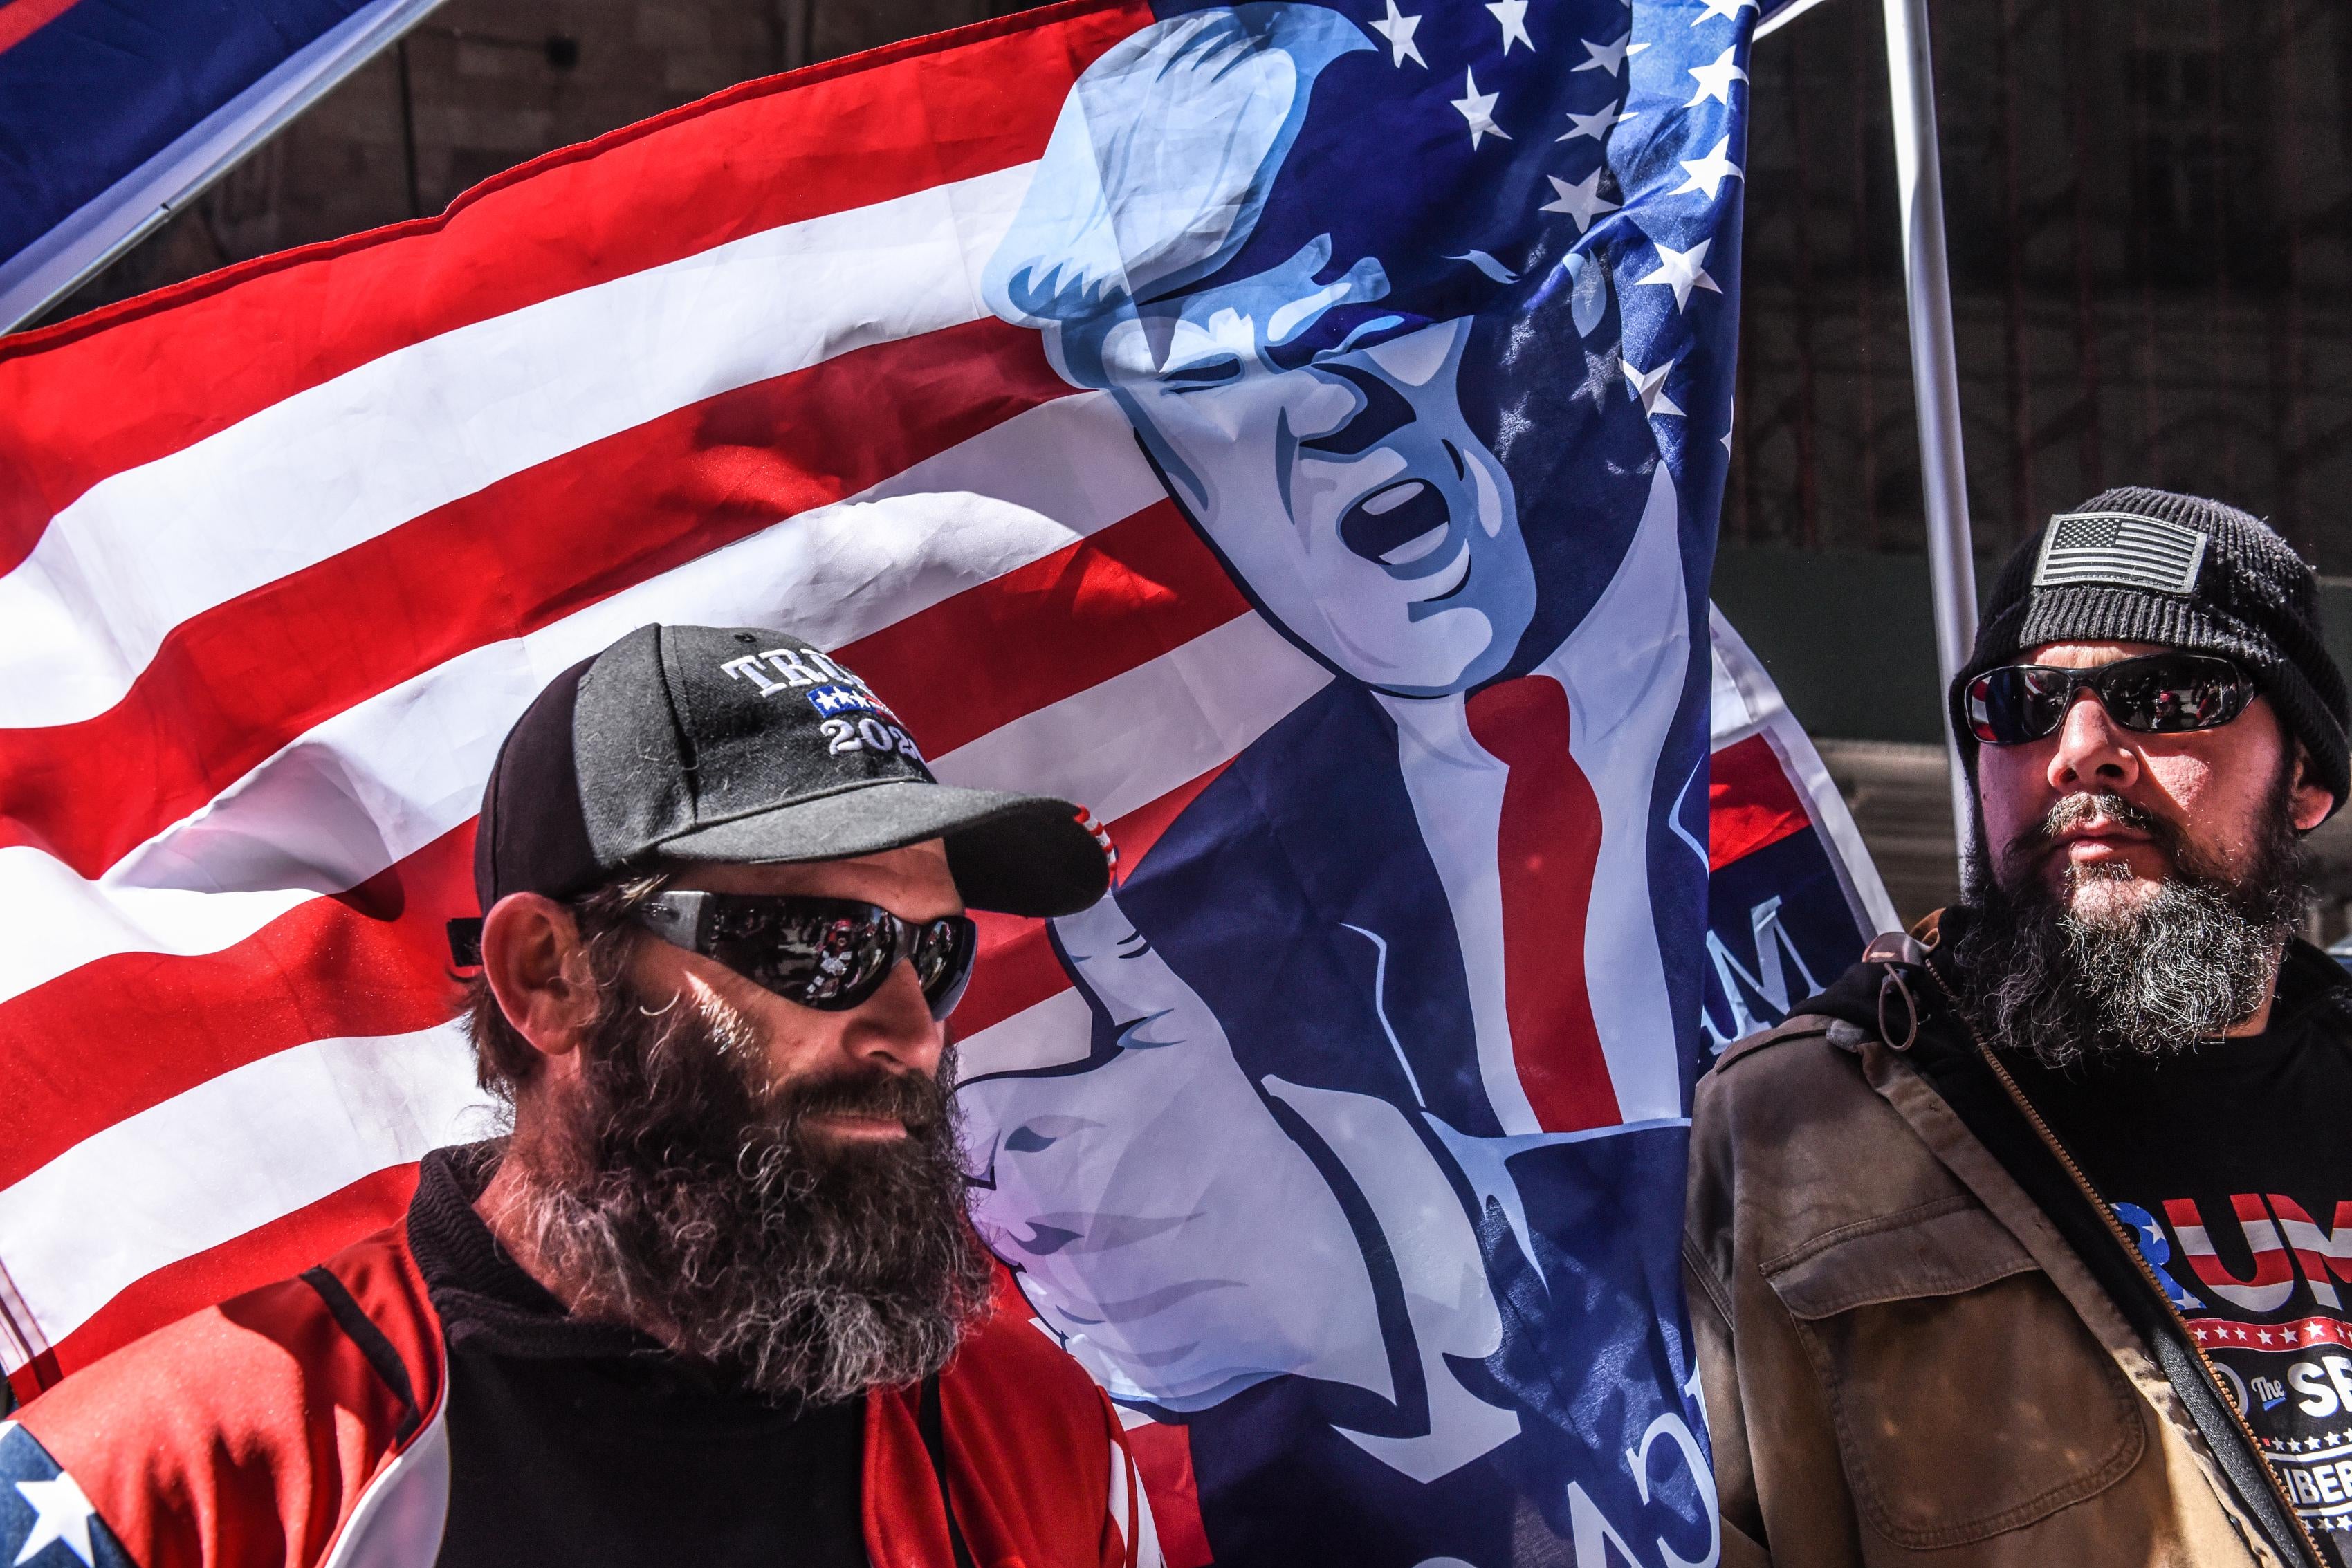 Two men in front of an American flag with Trump on it.